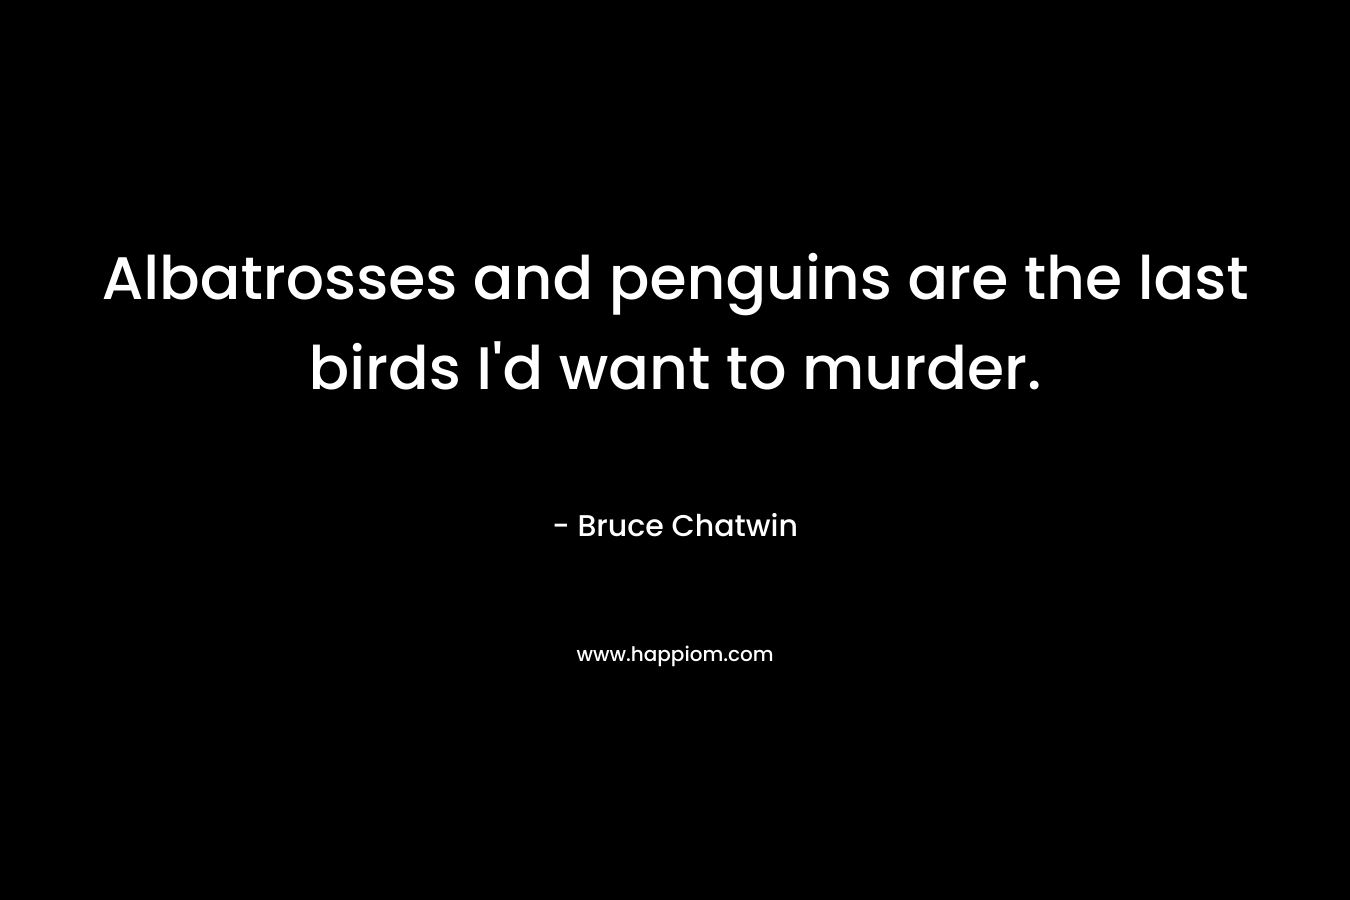 Albatrosses and penguins are the last birds I'd want to murder.